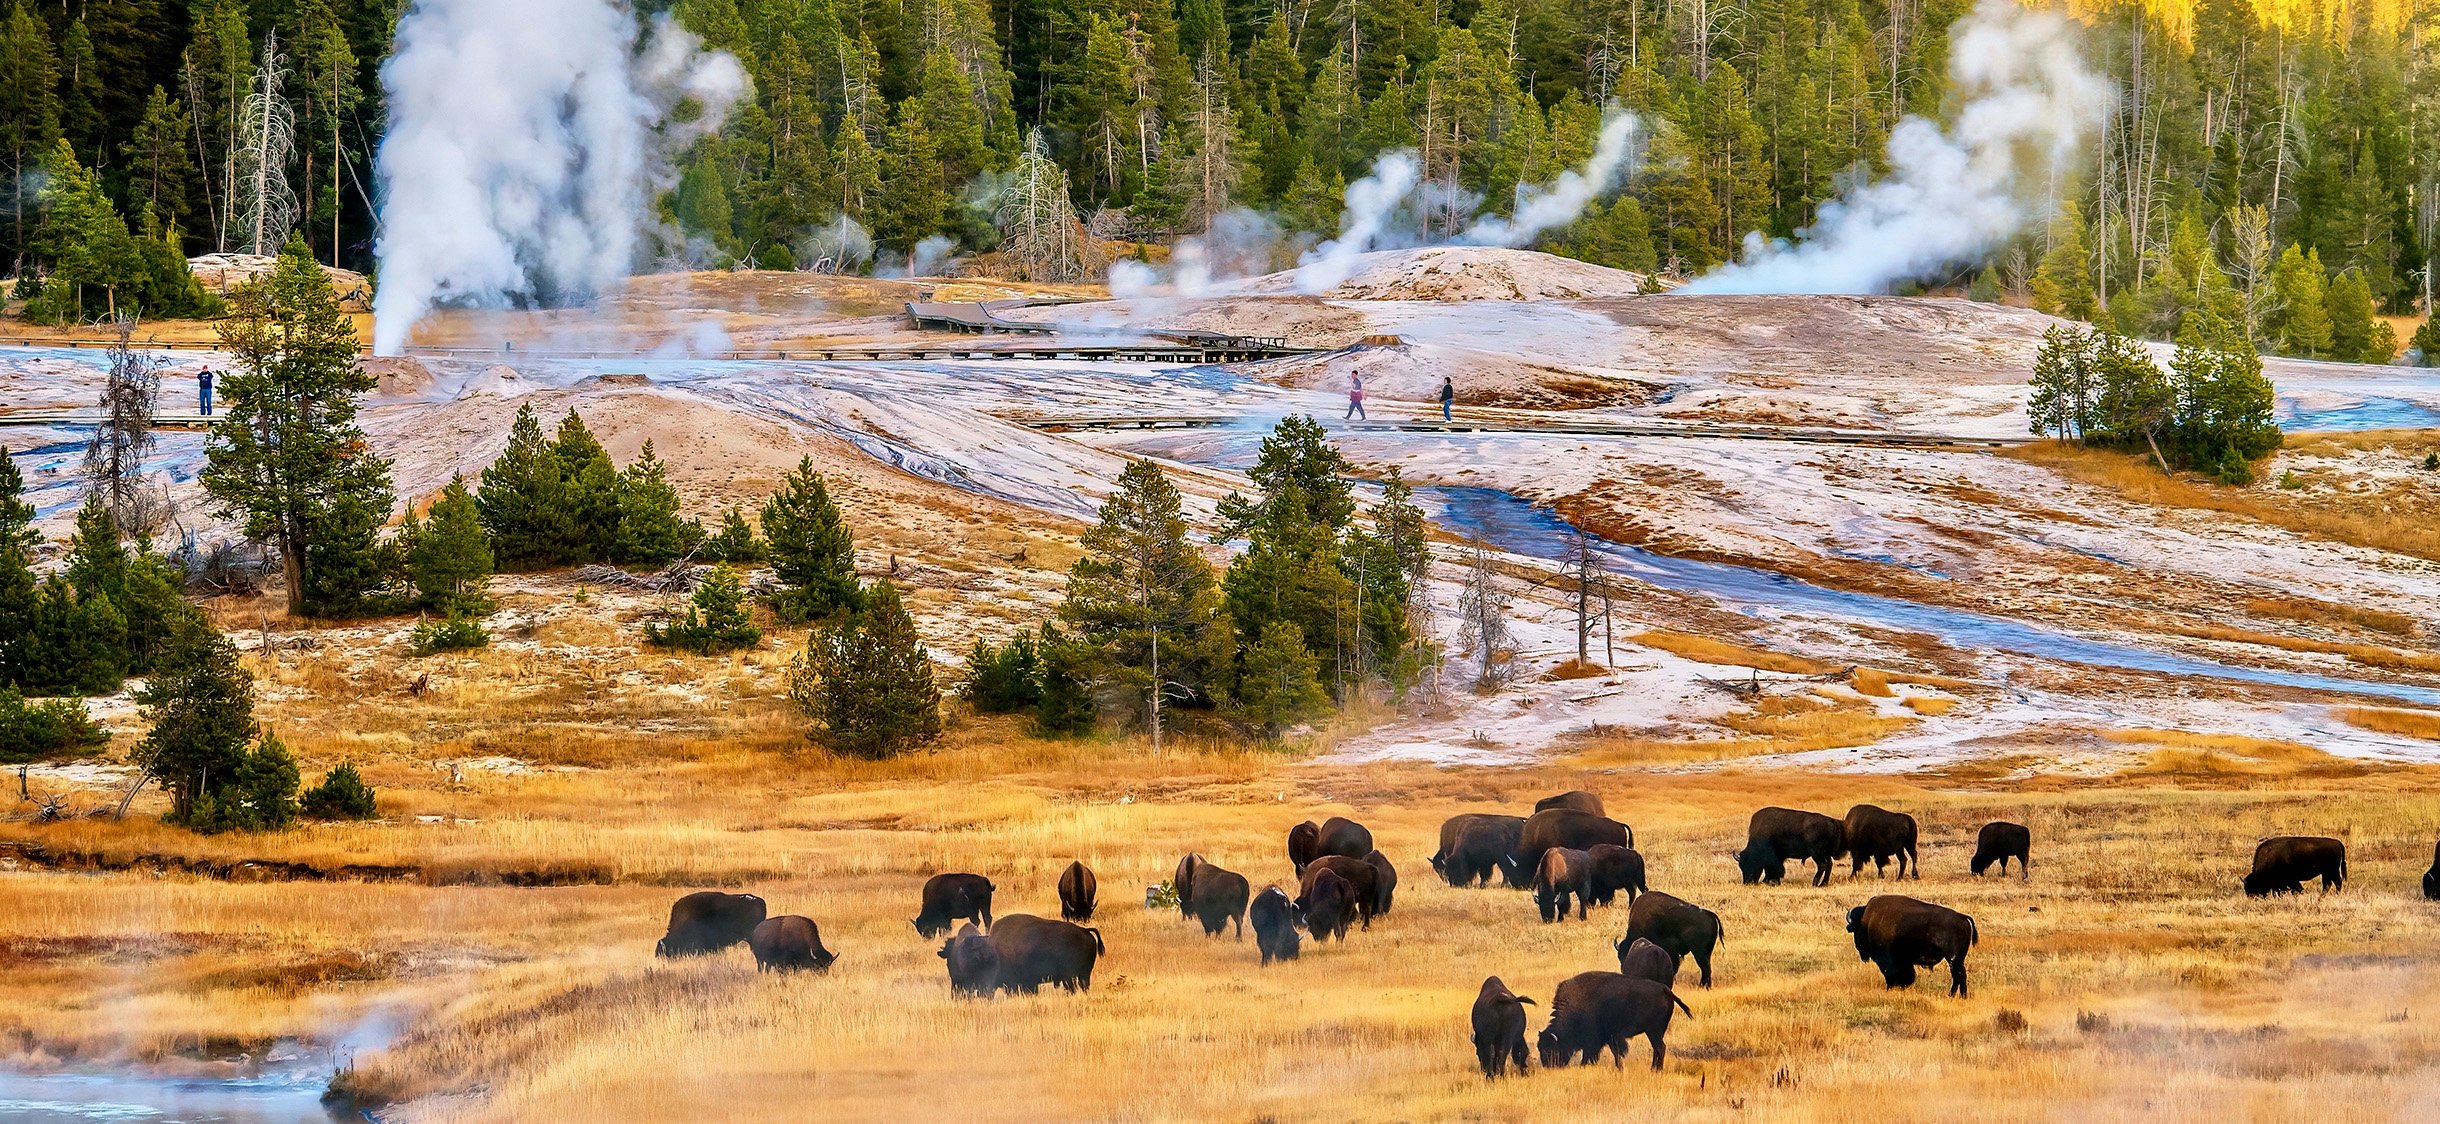 A landscape at the Upper Geyser Basin in Yellowstone National Park, where steam rises from geyser vents and hot springs near a forest of pine trees, and a herd of bison is grazing